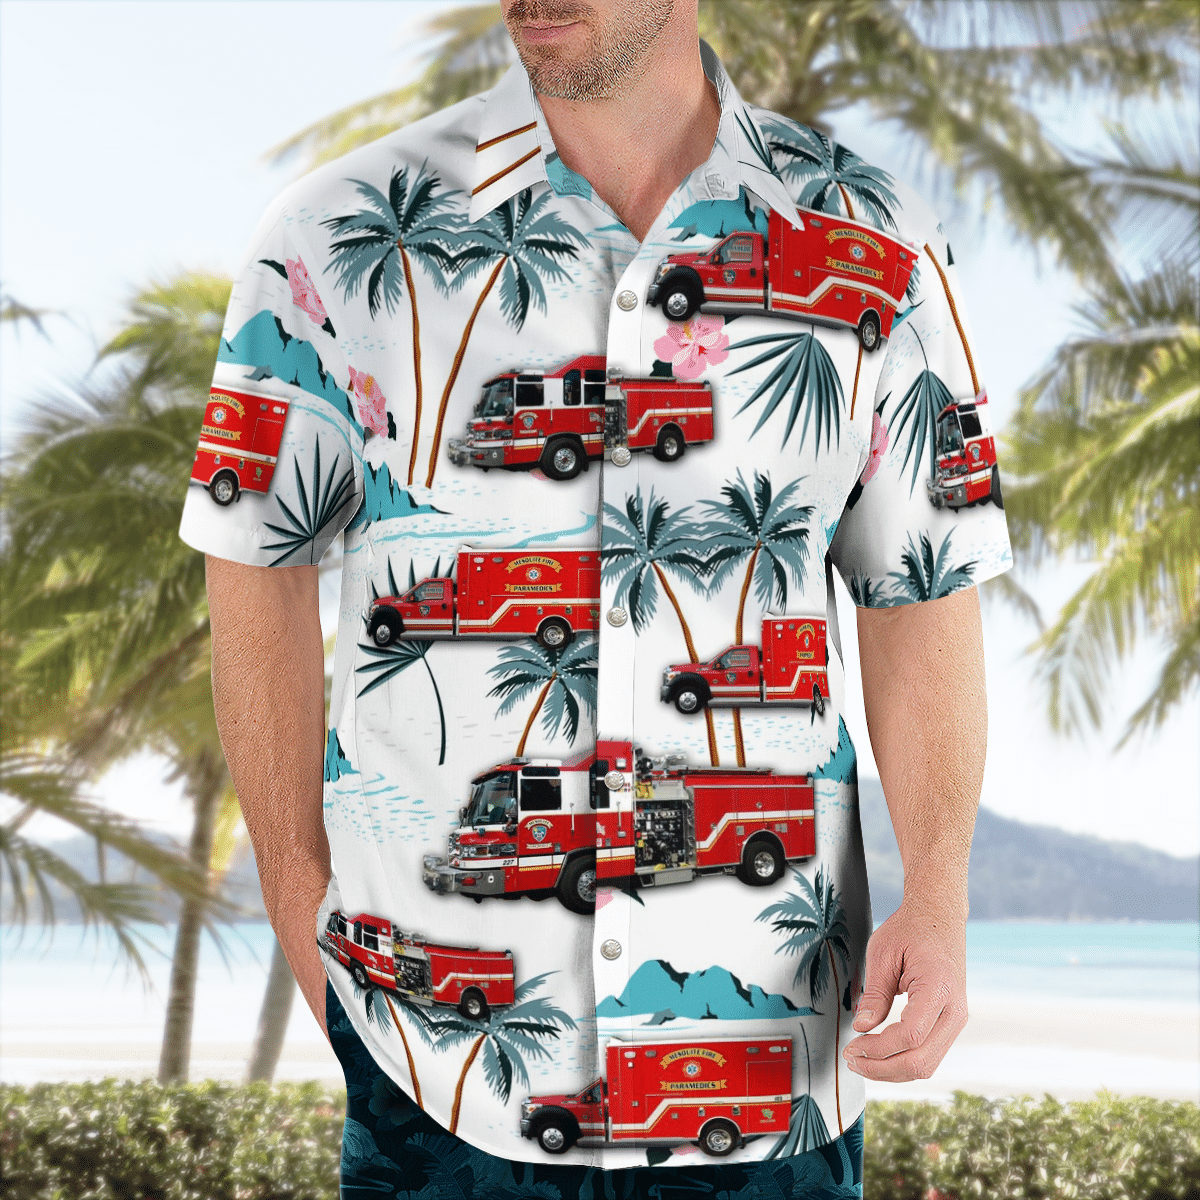 There are several styles of beach and Hawaiian shorts and tops to choose from 61